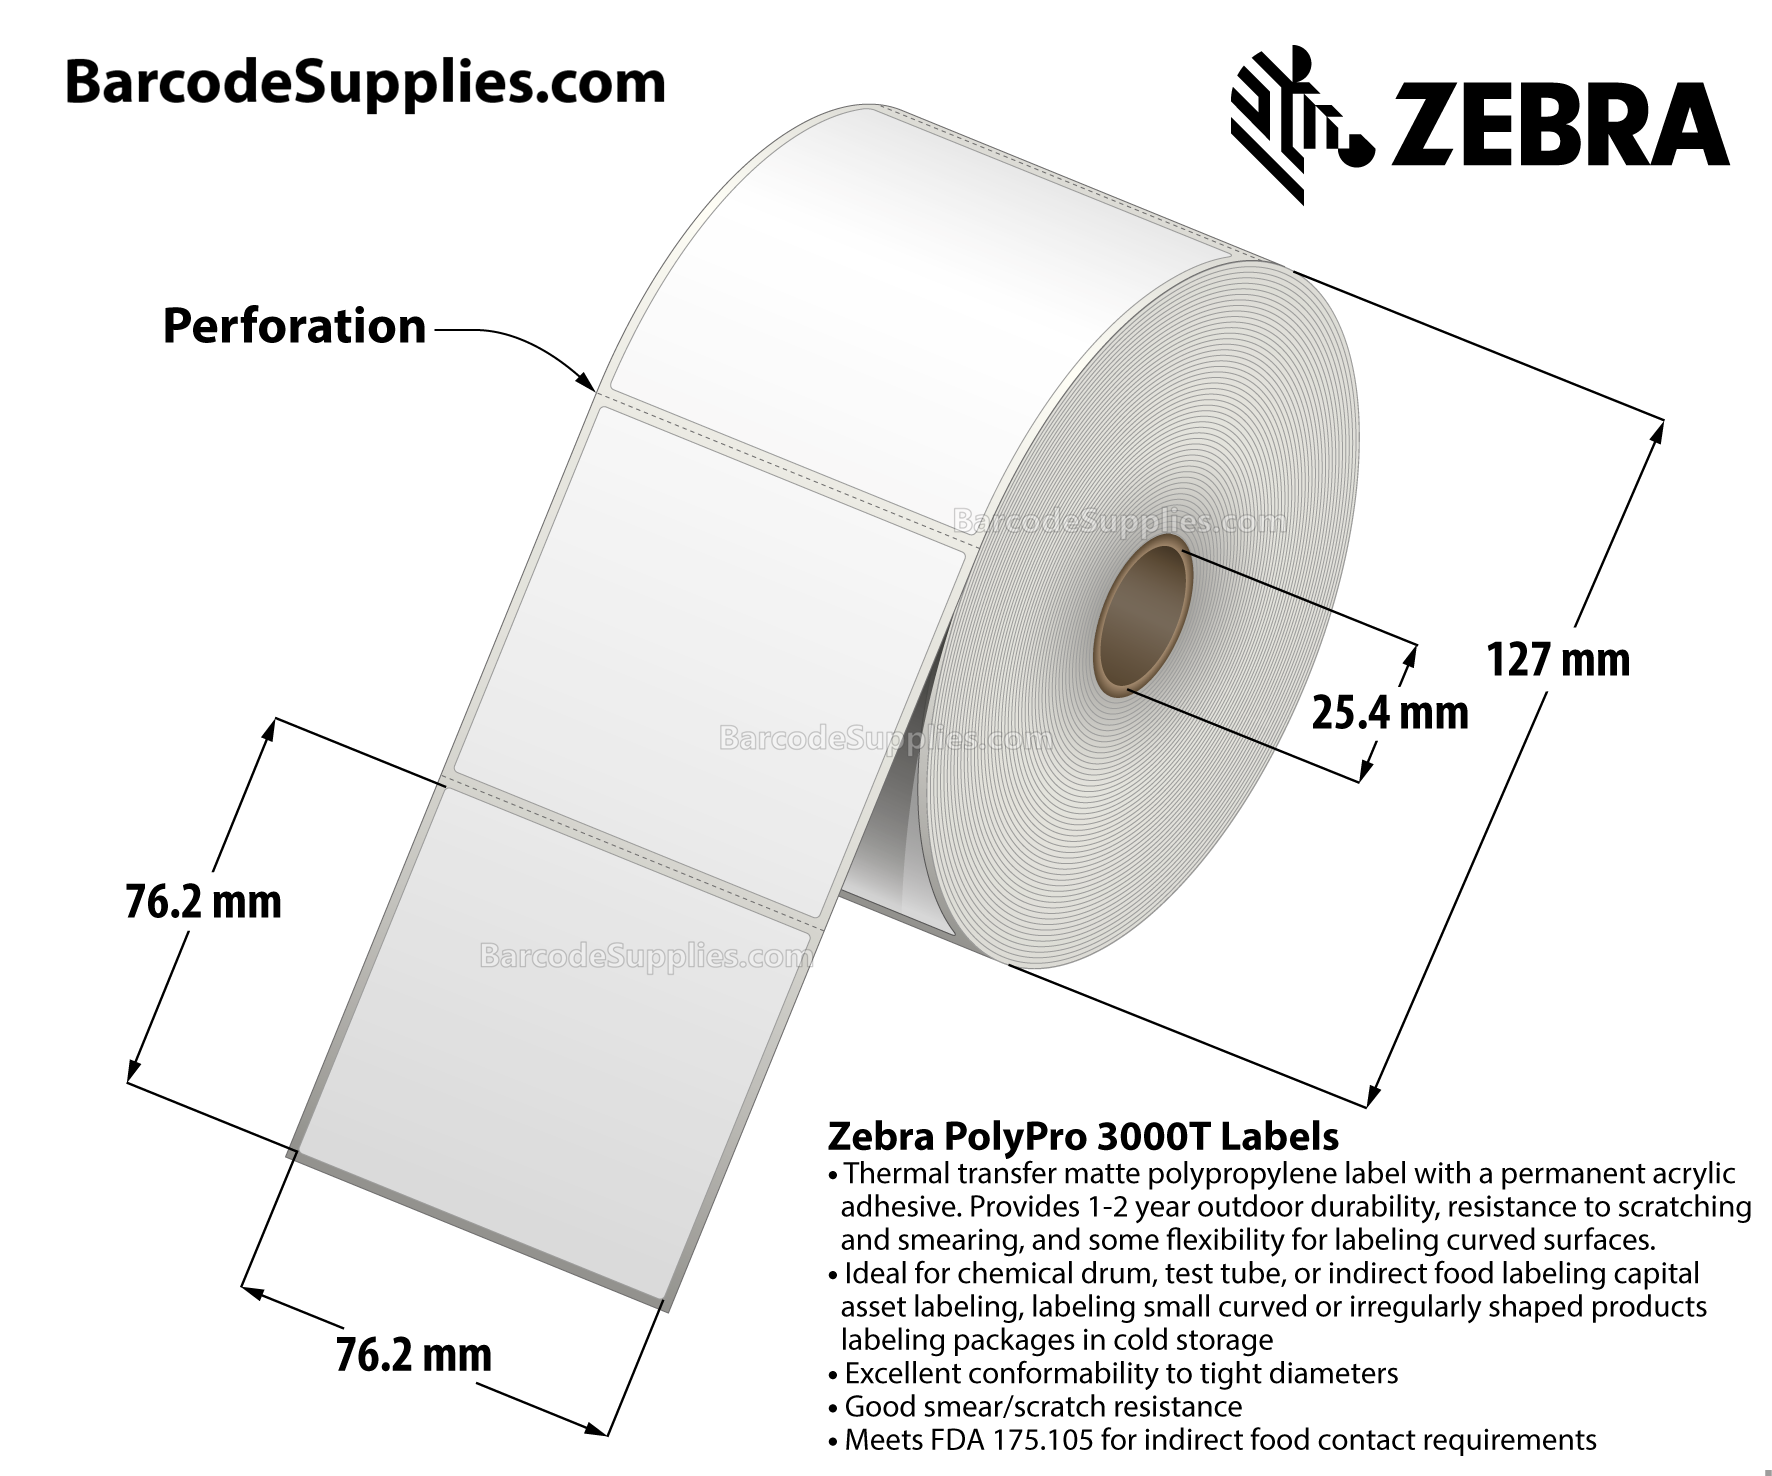 3 x 3 Thermal Transfer White PolyPro 3000T Labels With Permanent Adhesive - Perforated - 760 Labels Per Roll - Carton Of 8 Rolls - 6080 Labels Total - MPN: 18927